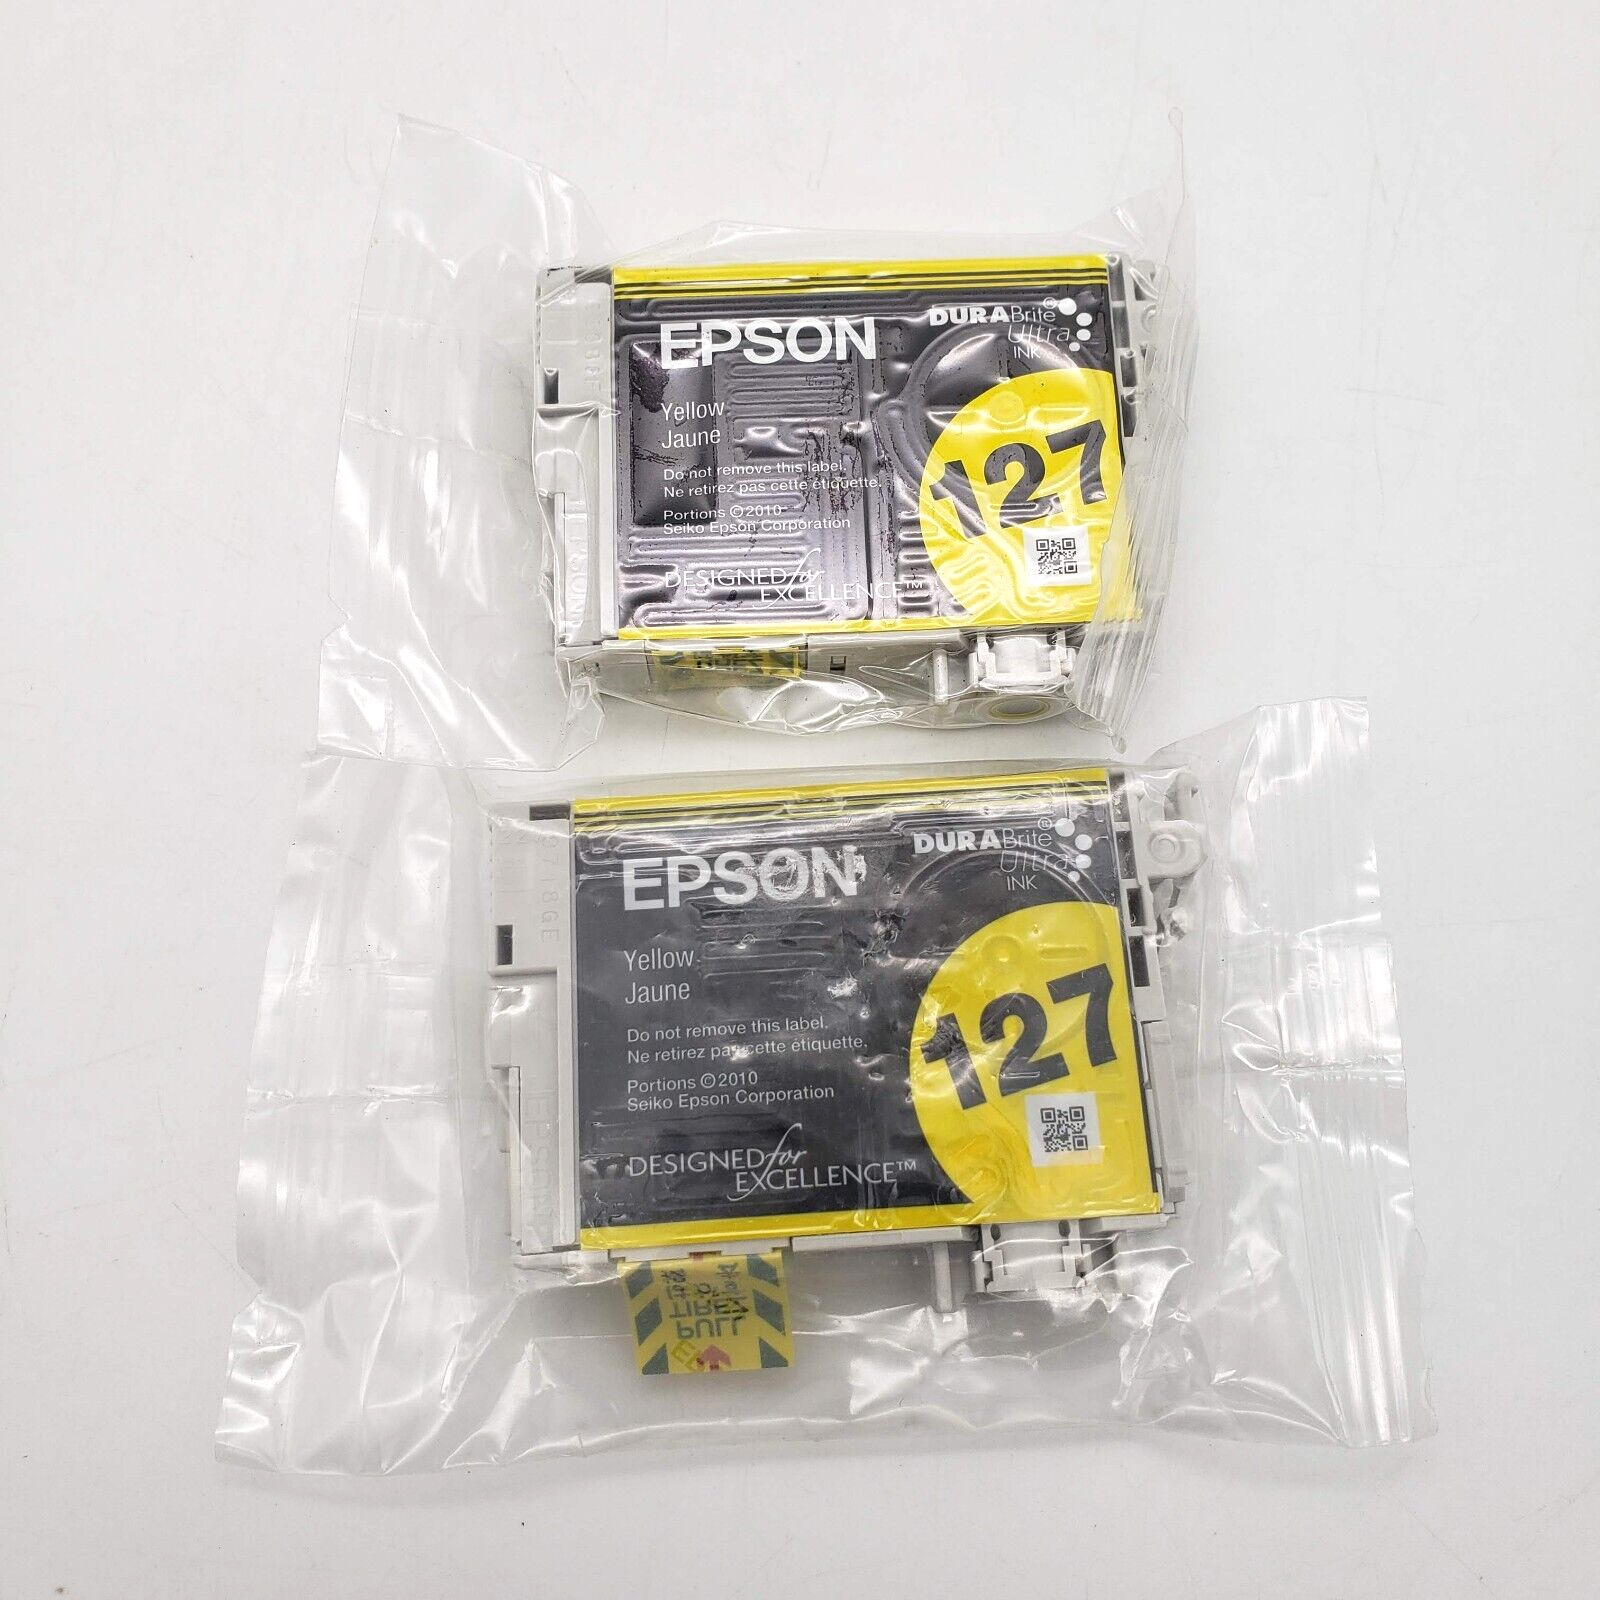 EPSON Dura Brite Ultra Ink 127 in Yellow (Pack of 2) NEW SEALED